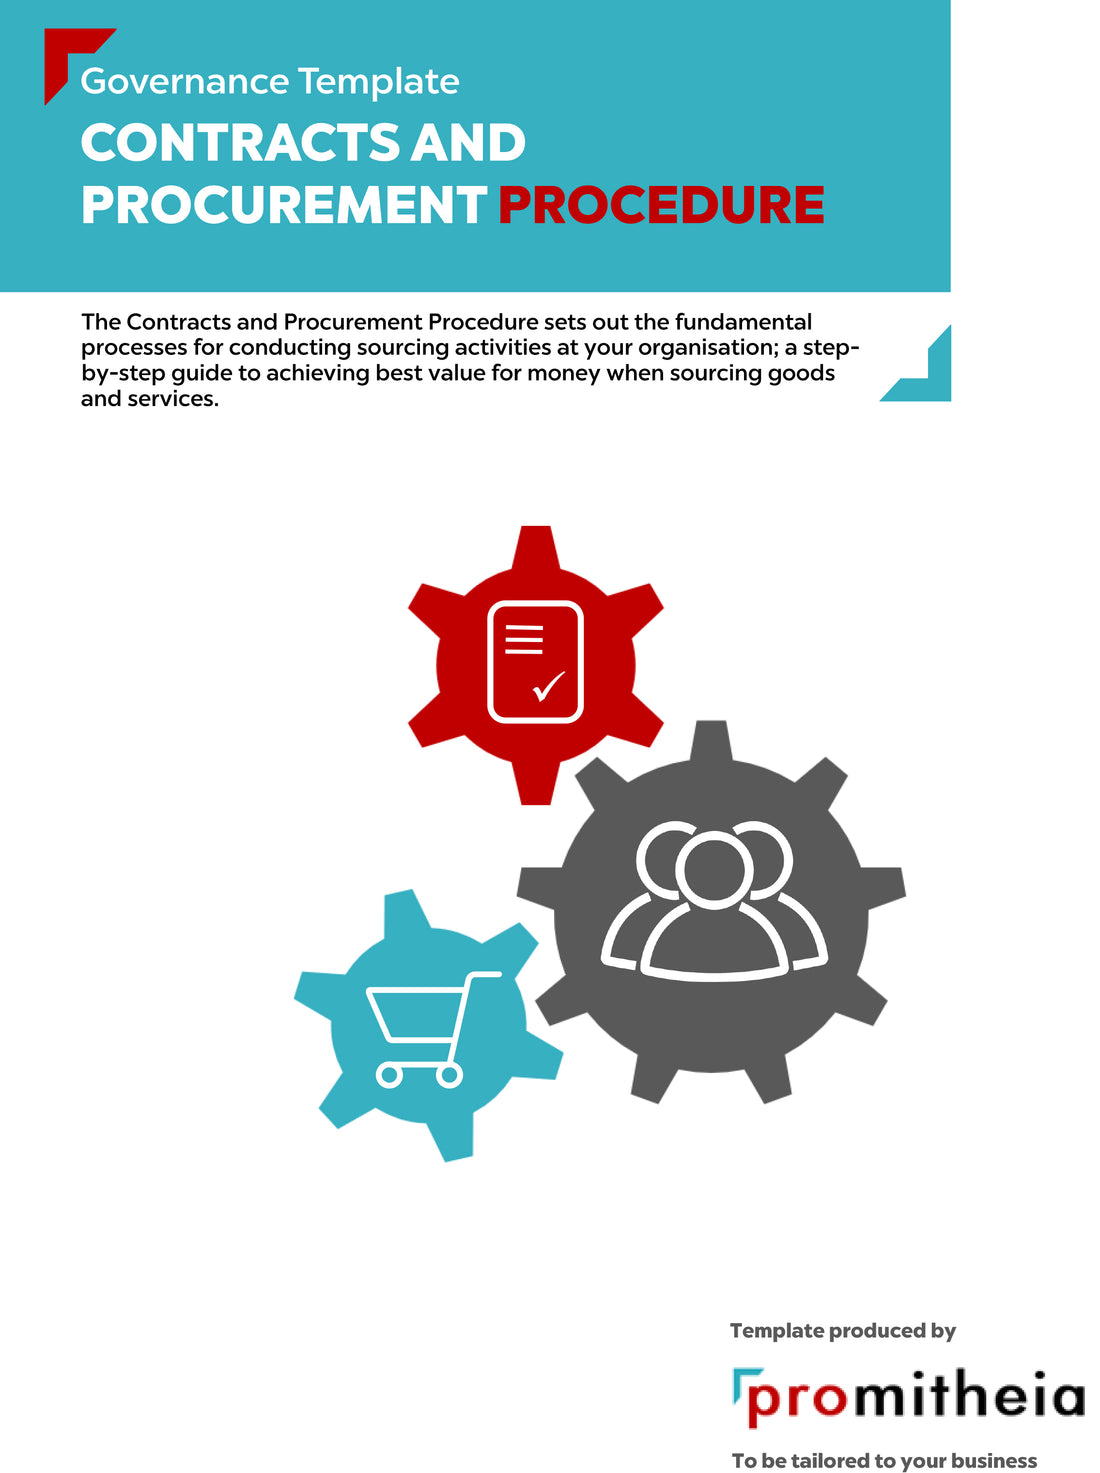 Need help with your Contracts & Procurement (C&P) Procedure?